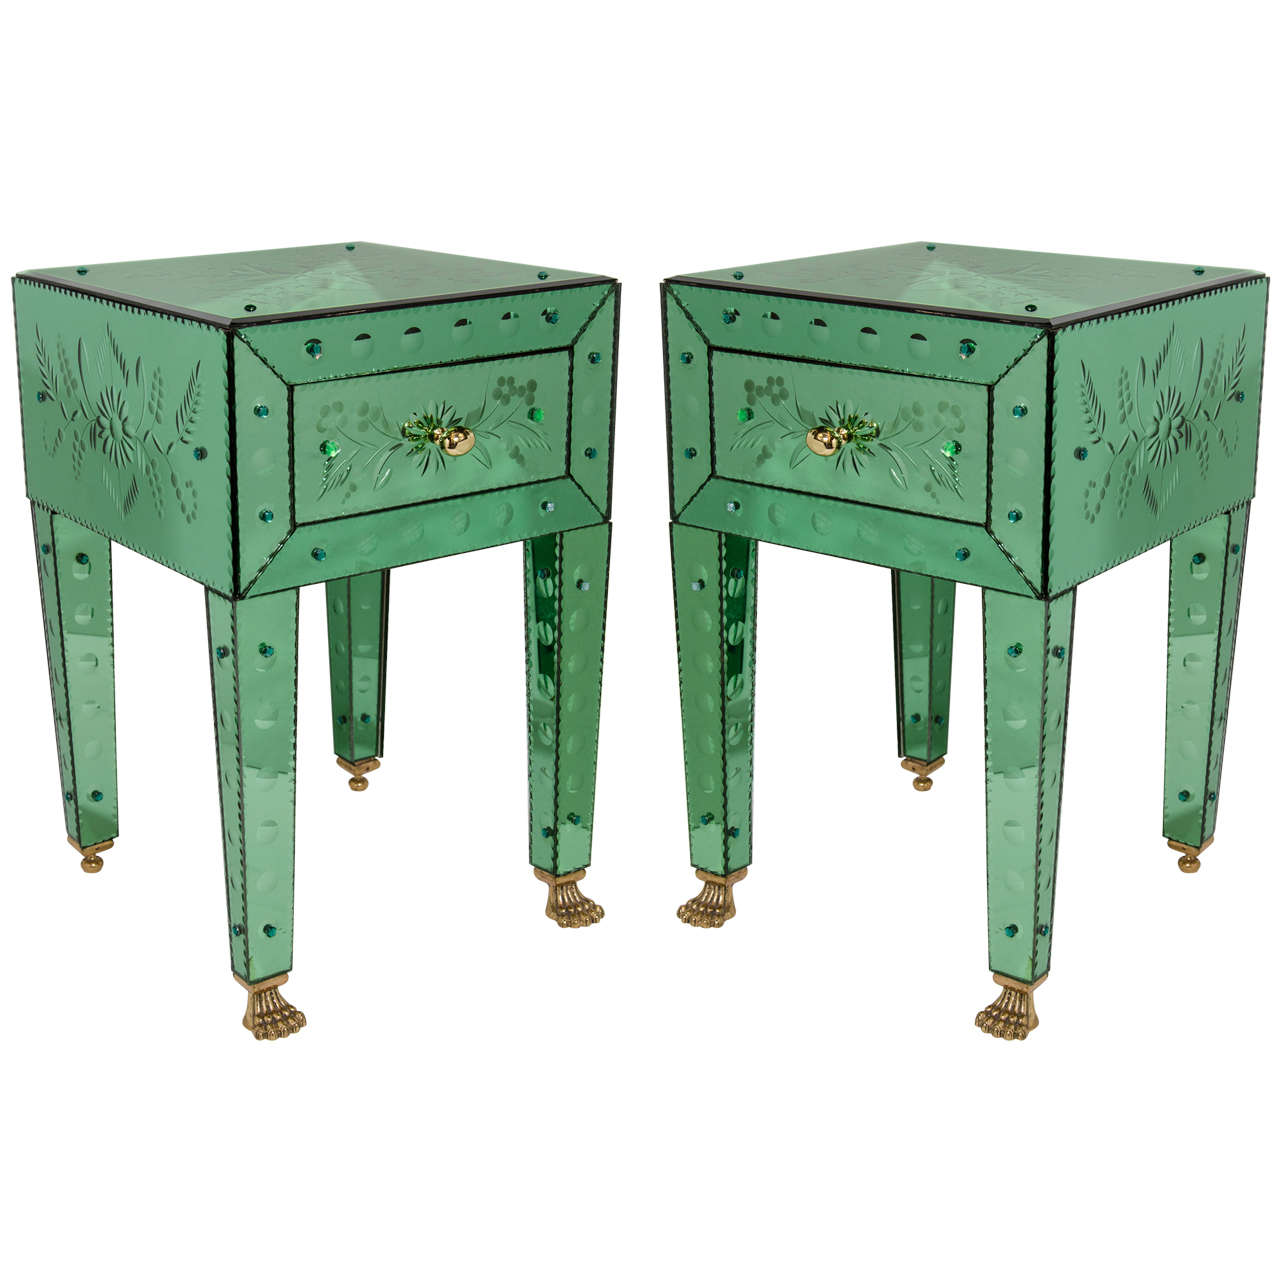 Pair of Emerald Venetian Mirrored End Tables with Reverse Etched Designs